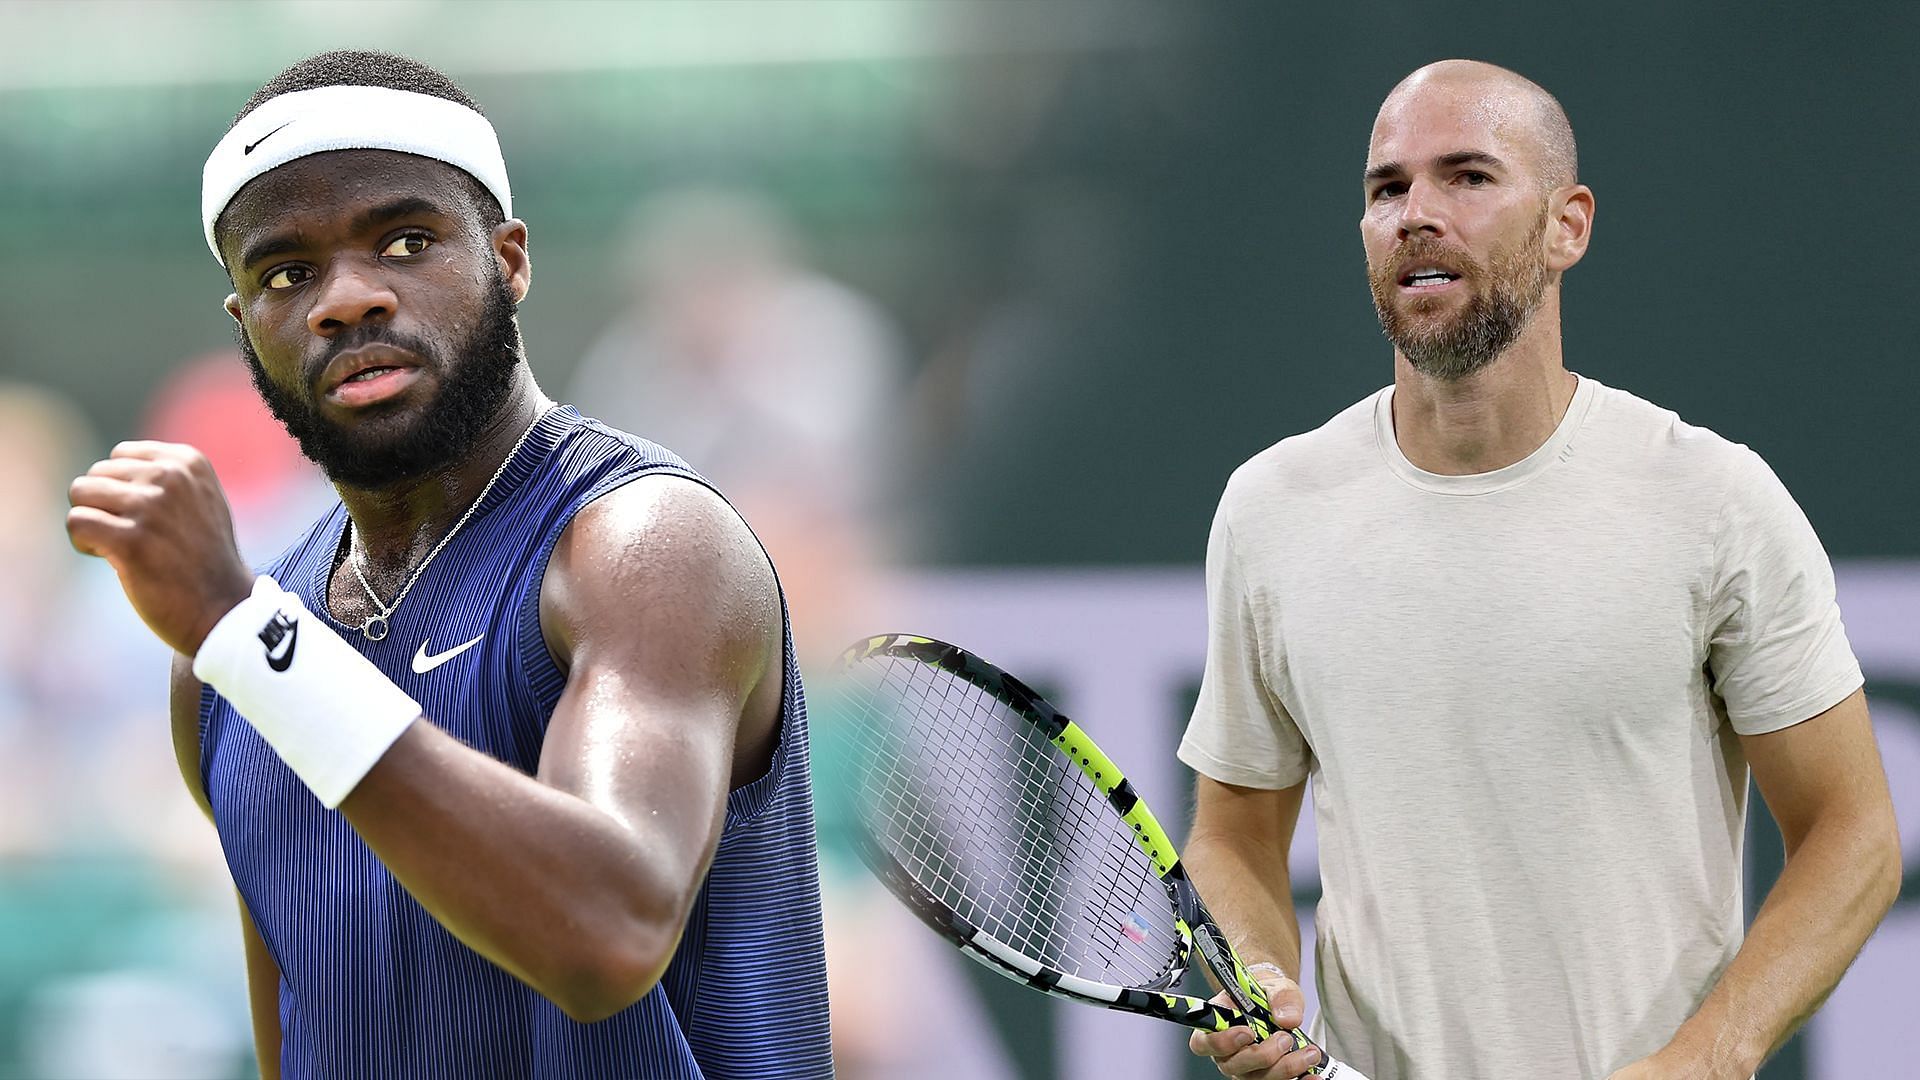 Frances Tiafoe vs Adrian Mannarino is one of the third-round matches at the 2023 US Open.